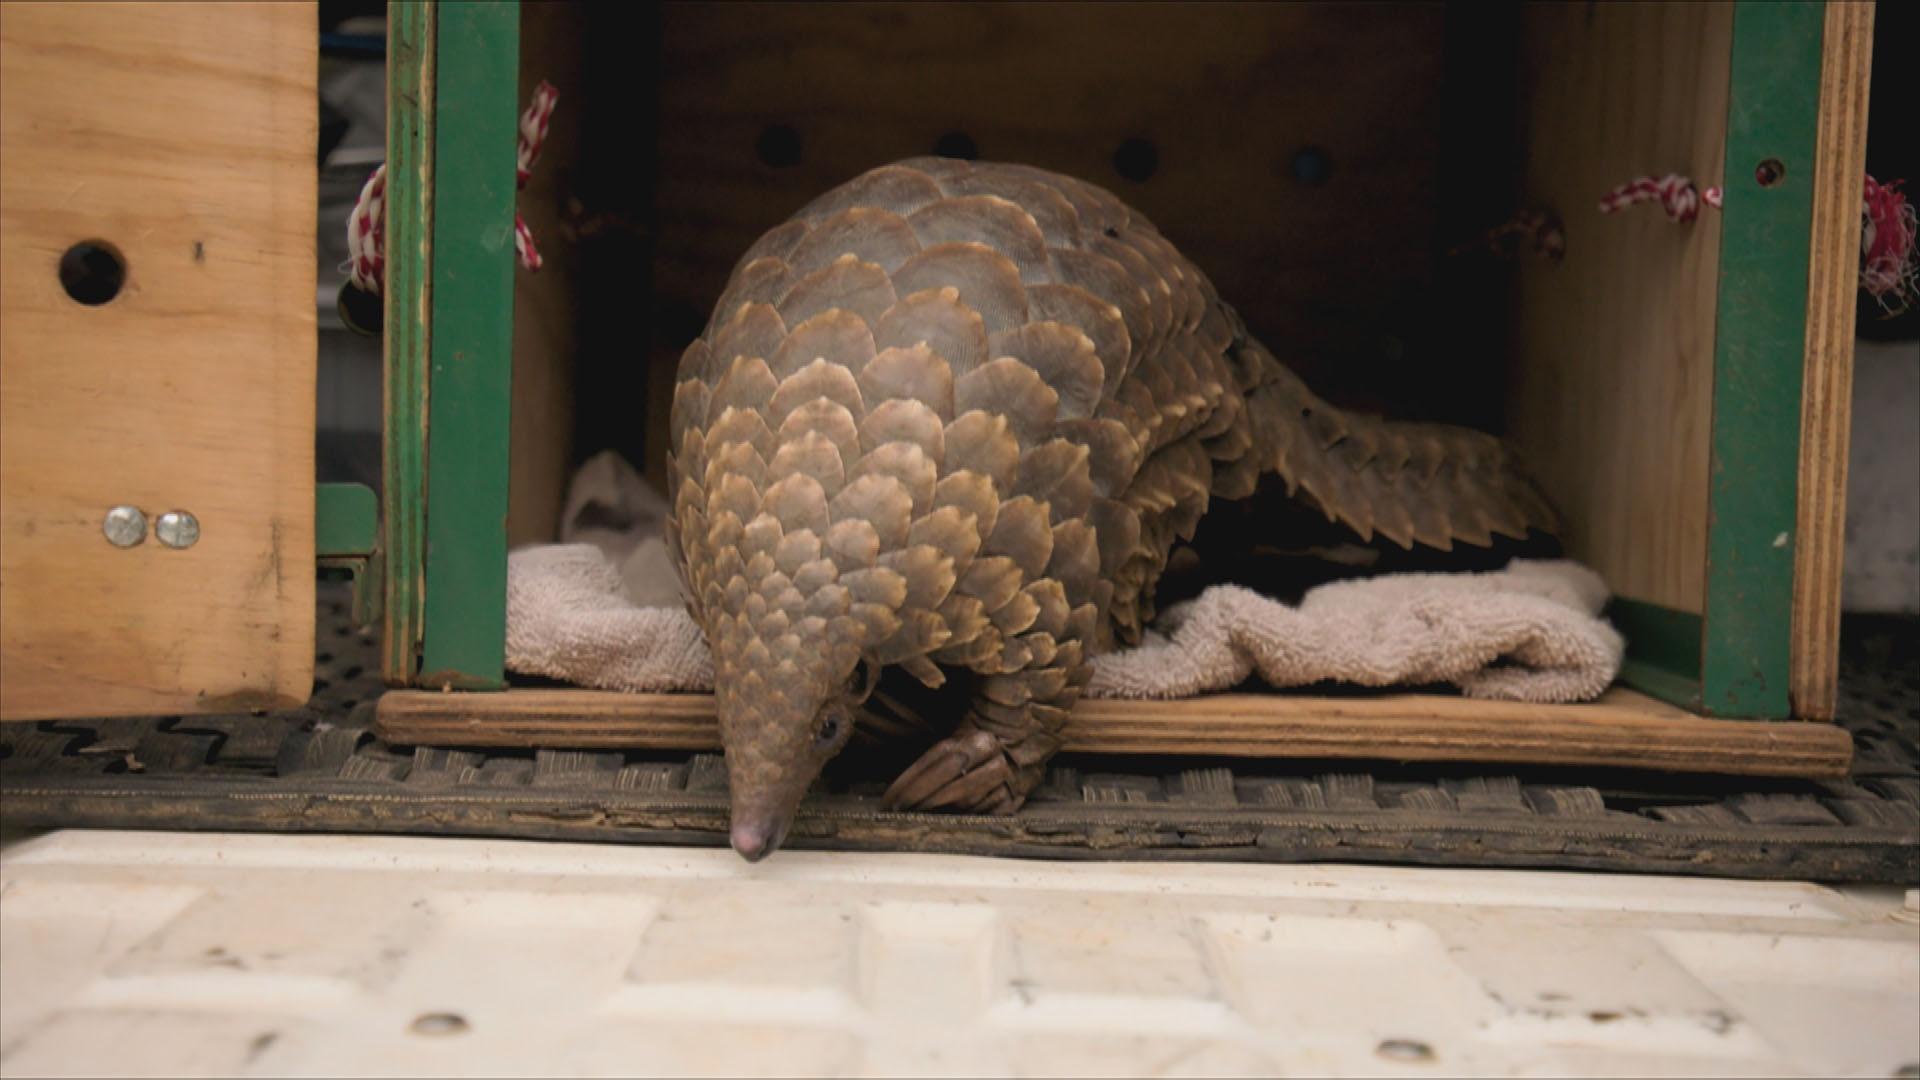 A pangolin coming out of a trap in South Africa.